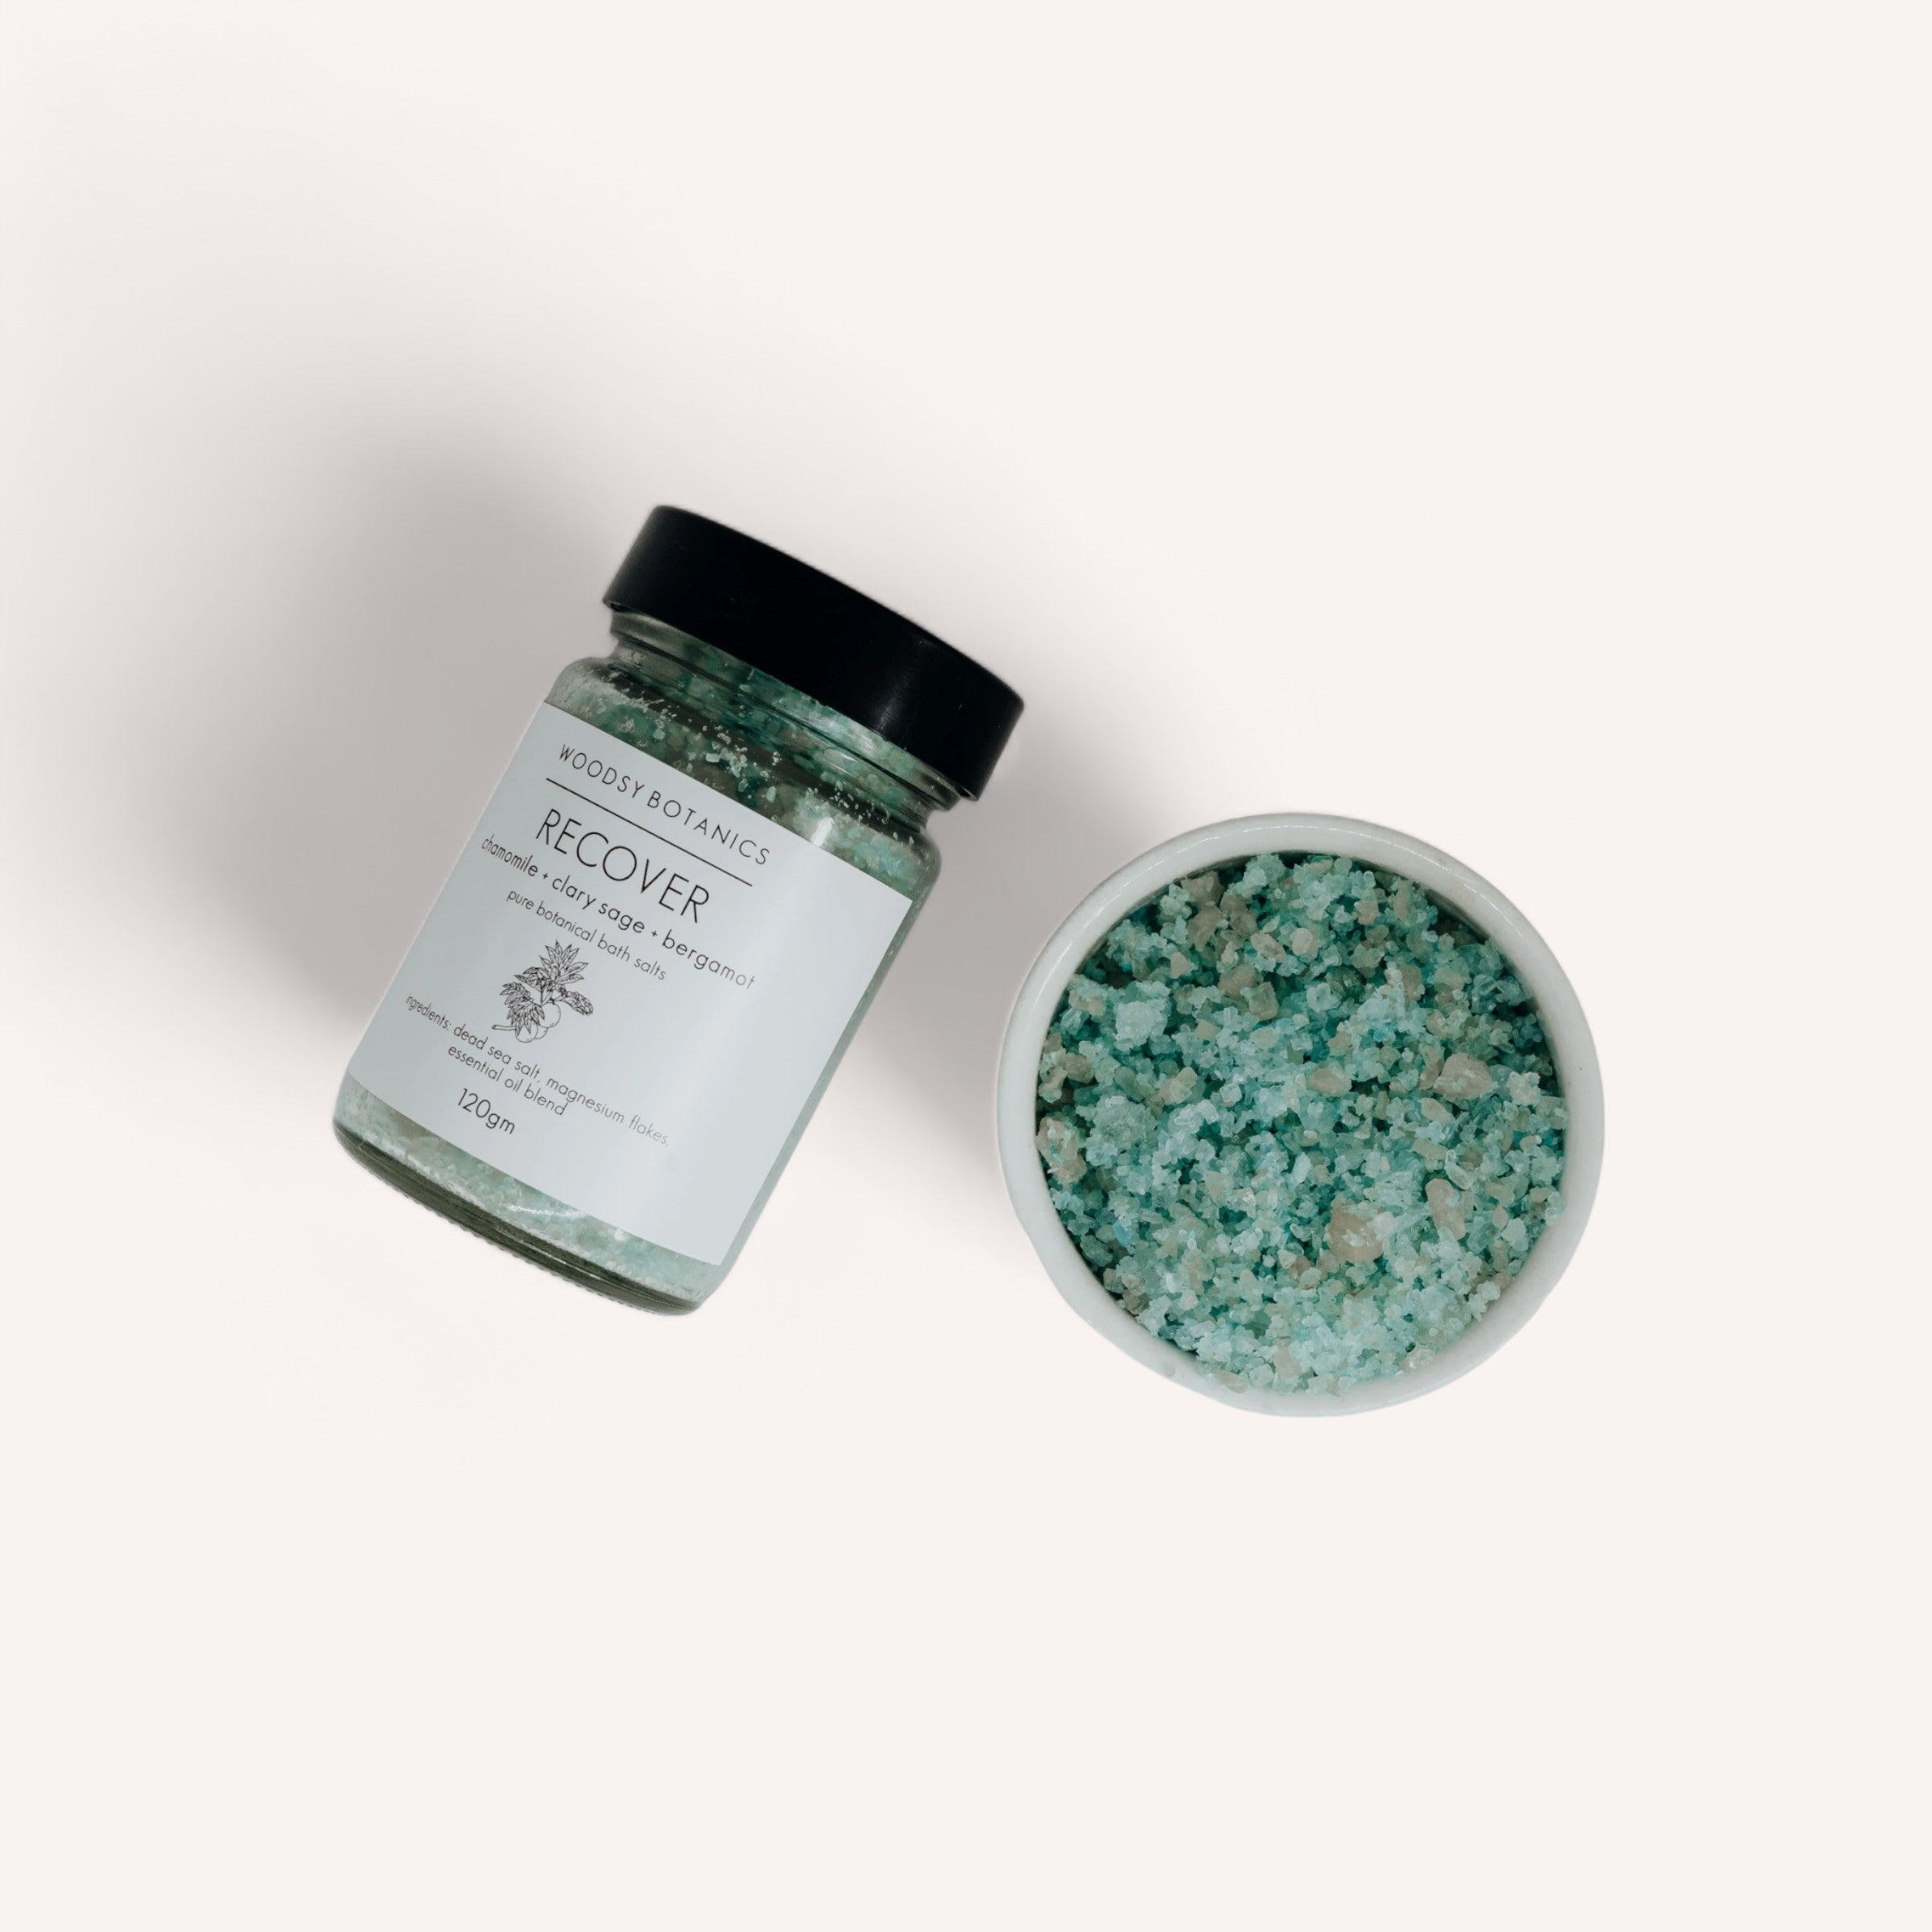 A jar of Woodsy Botanics' Bath Lovers Gift Set labeled "restore" alongside its open lid, revealing the green crystals inside, on a clean white background.